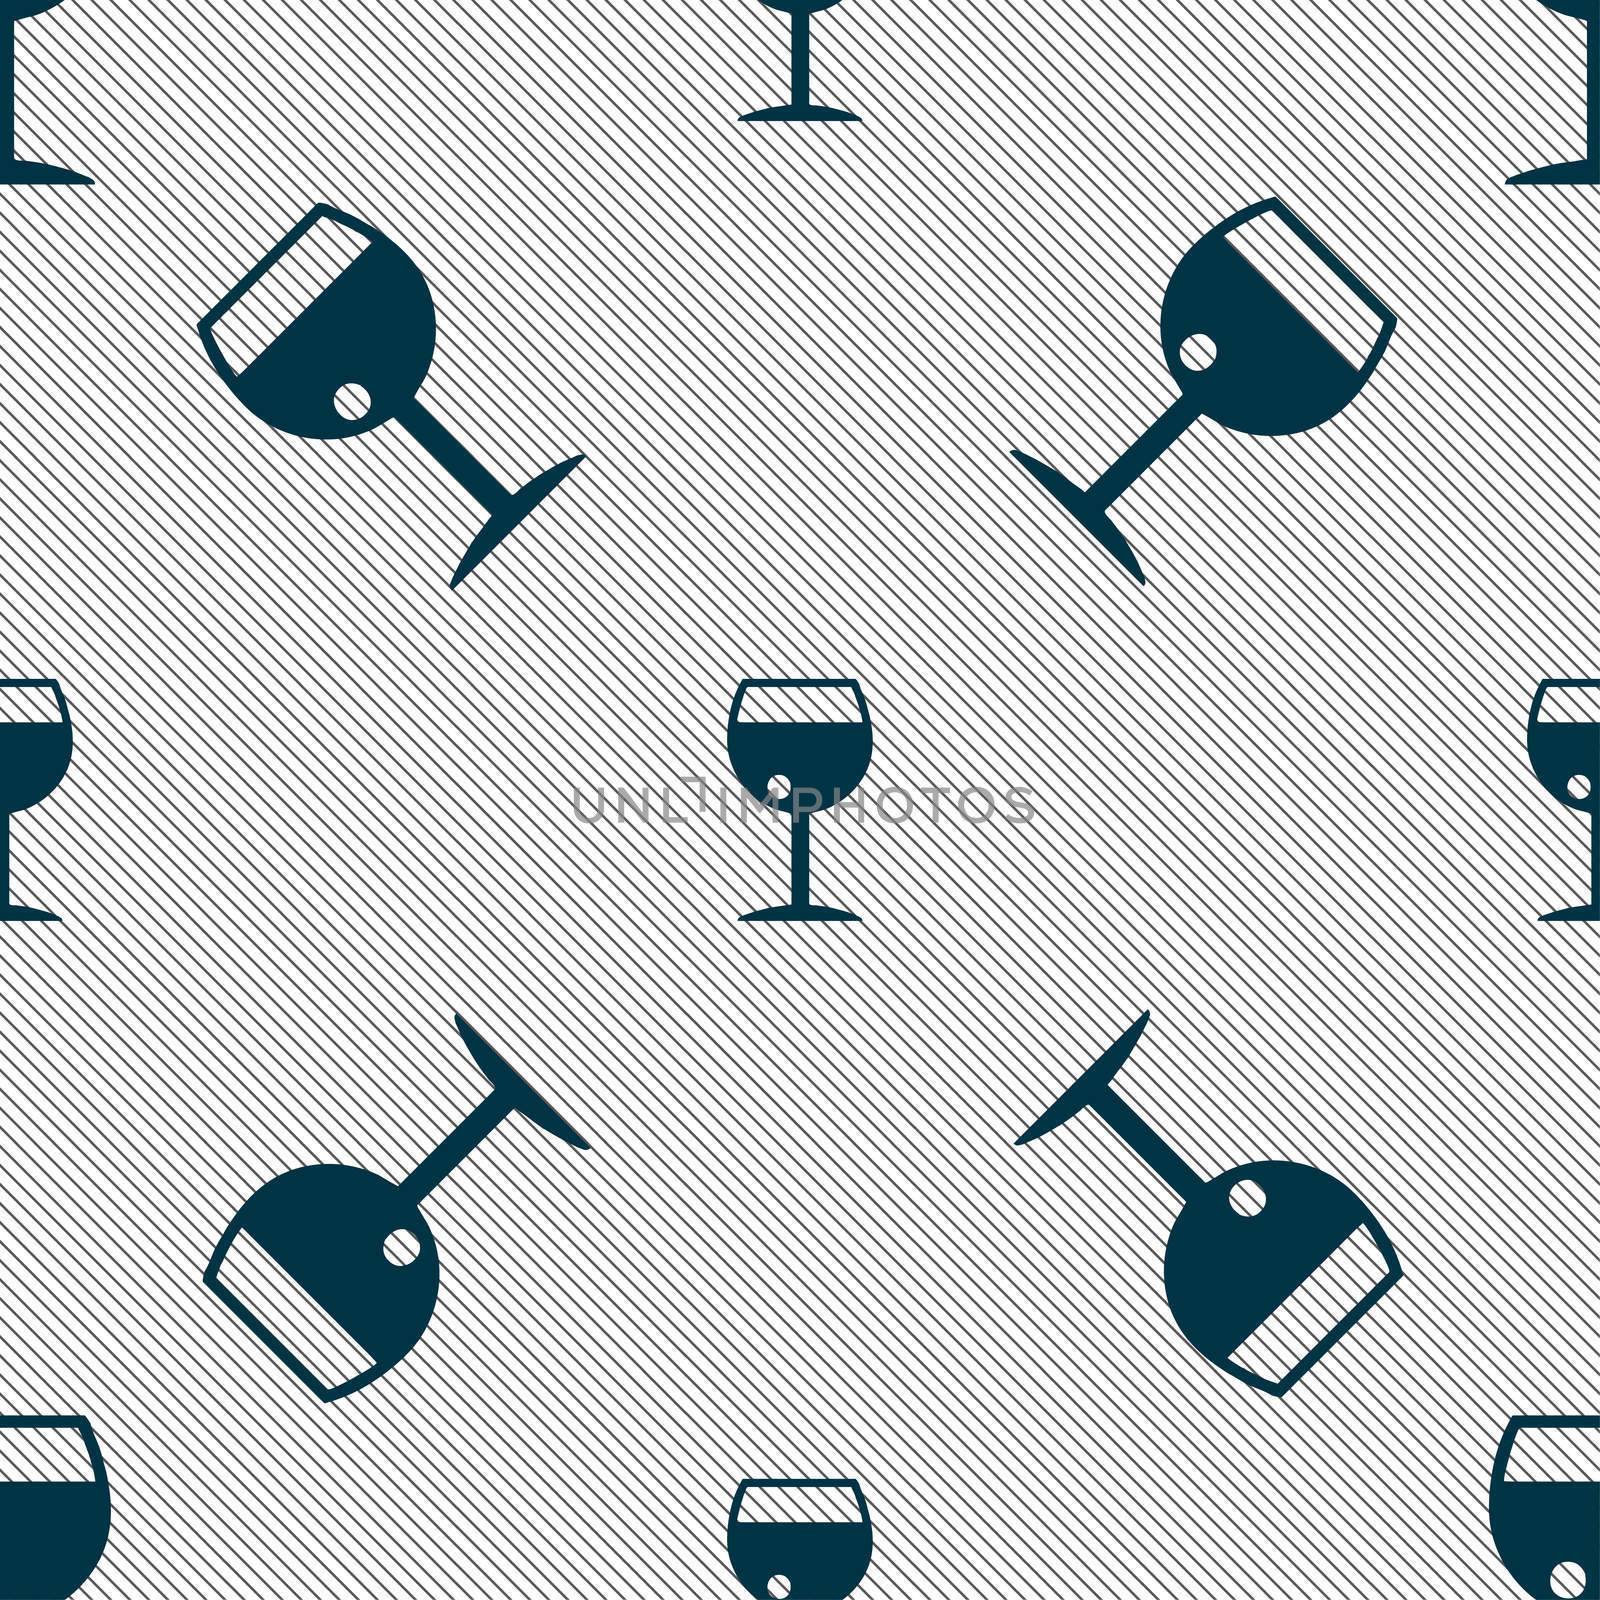 glass of wine icon sign. Seamless pattern with geometric texture.  by serhii_lohvyniuk